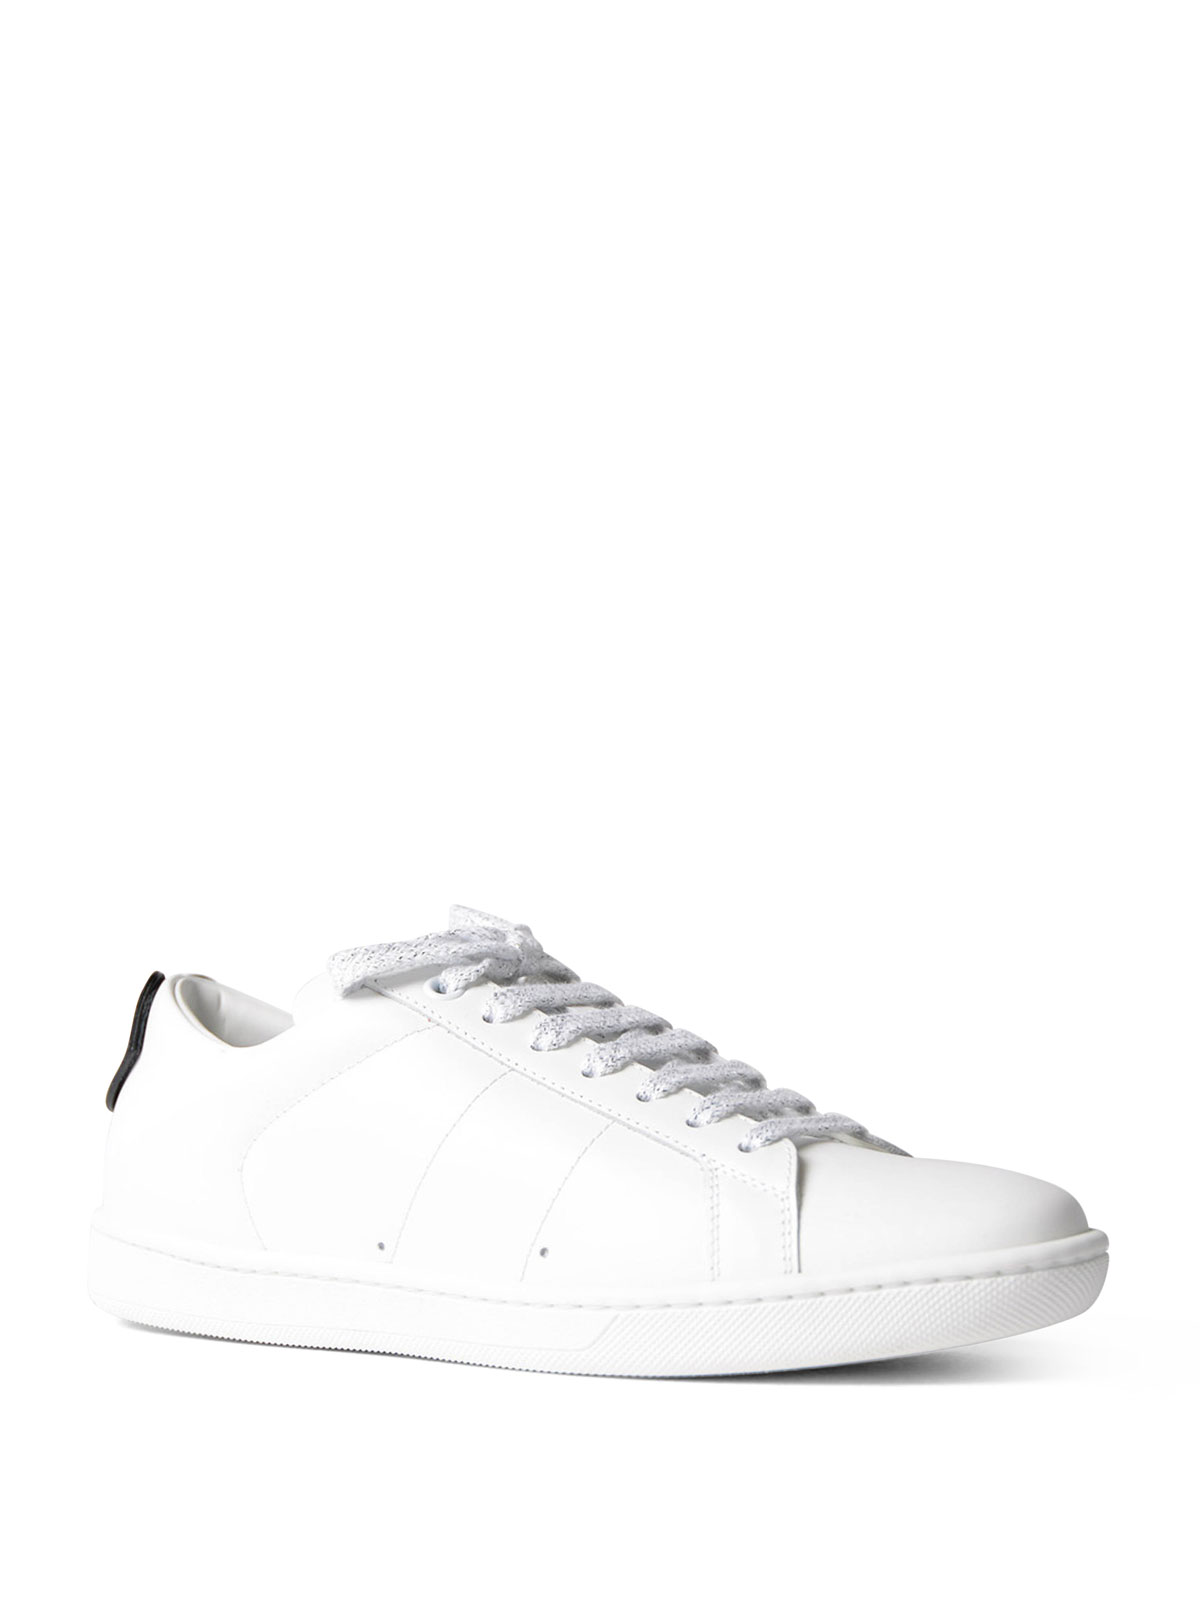 Trainers Saint Laurent - Lips patch leather sneakers - 484928EXV608083